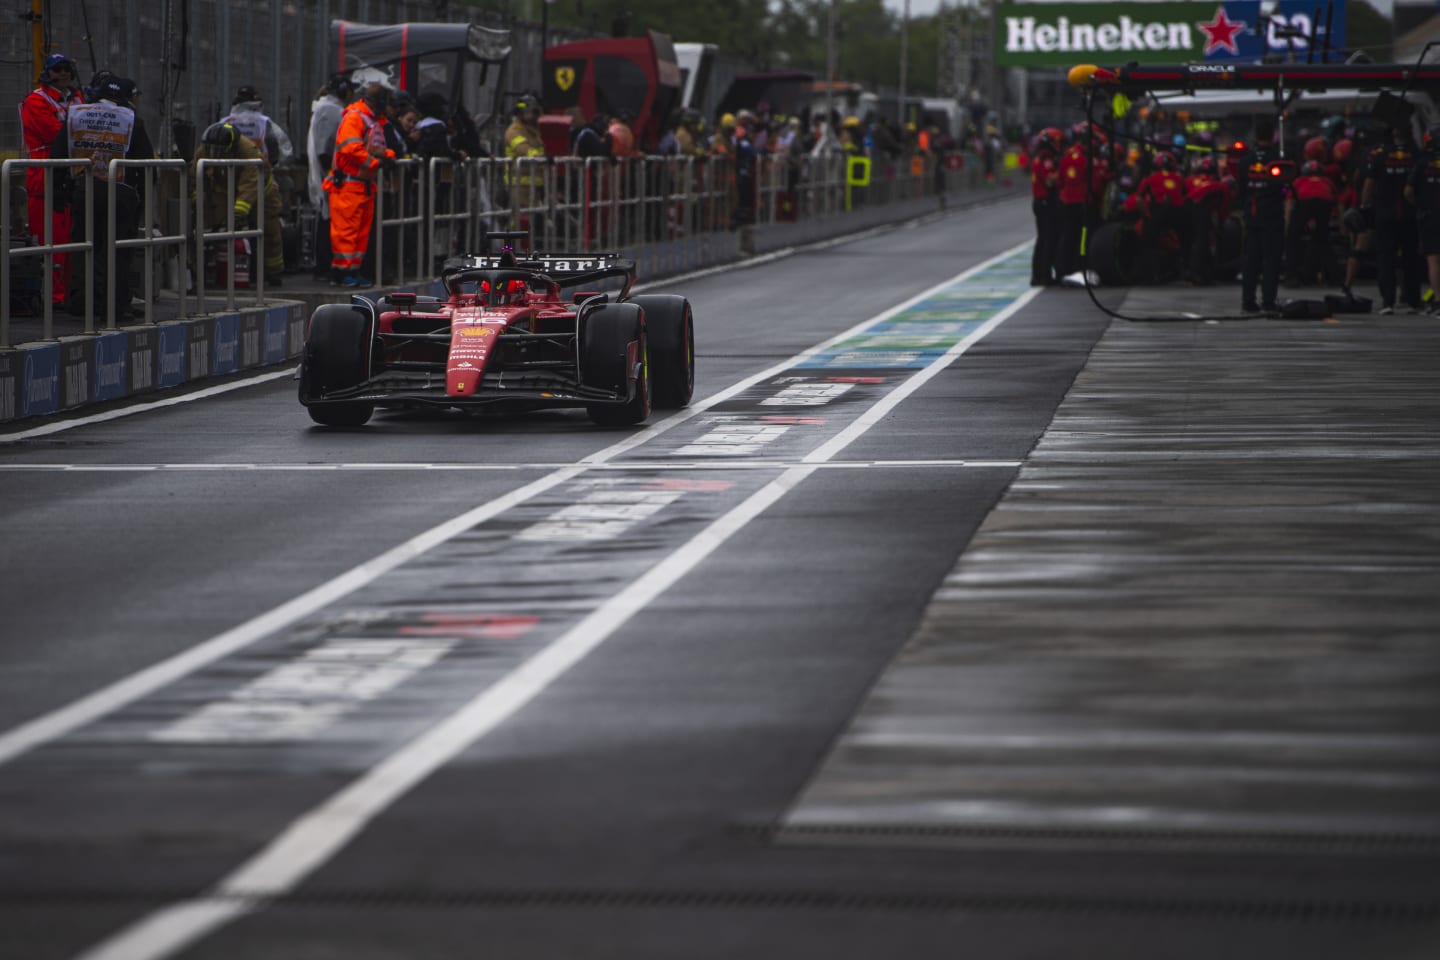 MONTREAL, QUEBEC - JUNE 17: Charles Leclerc of Monaco driving the (16) Ferrari SF-23 in the Pitlane during qualifying ahead of the F1 Grand Prix of Canada at Circuit Gilles Villeneuve on June 17, 2023 in Montreal, Quebec. (Photo by Rudy Carezzevoli/Getty Images)